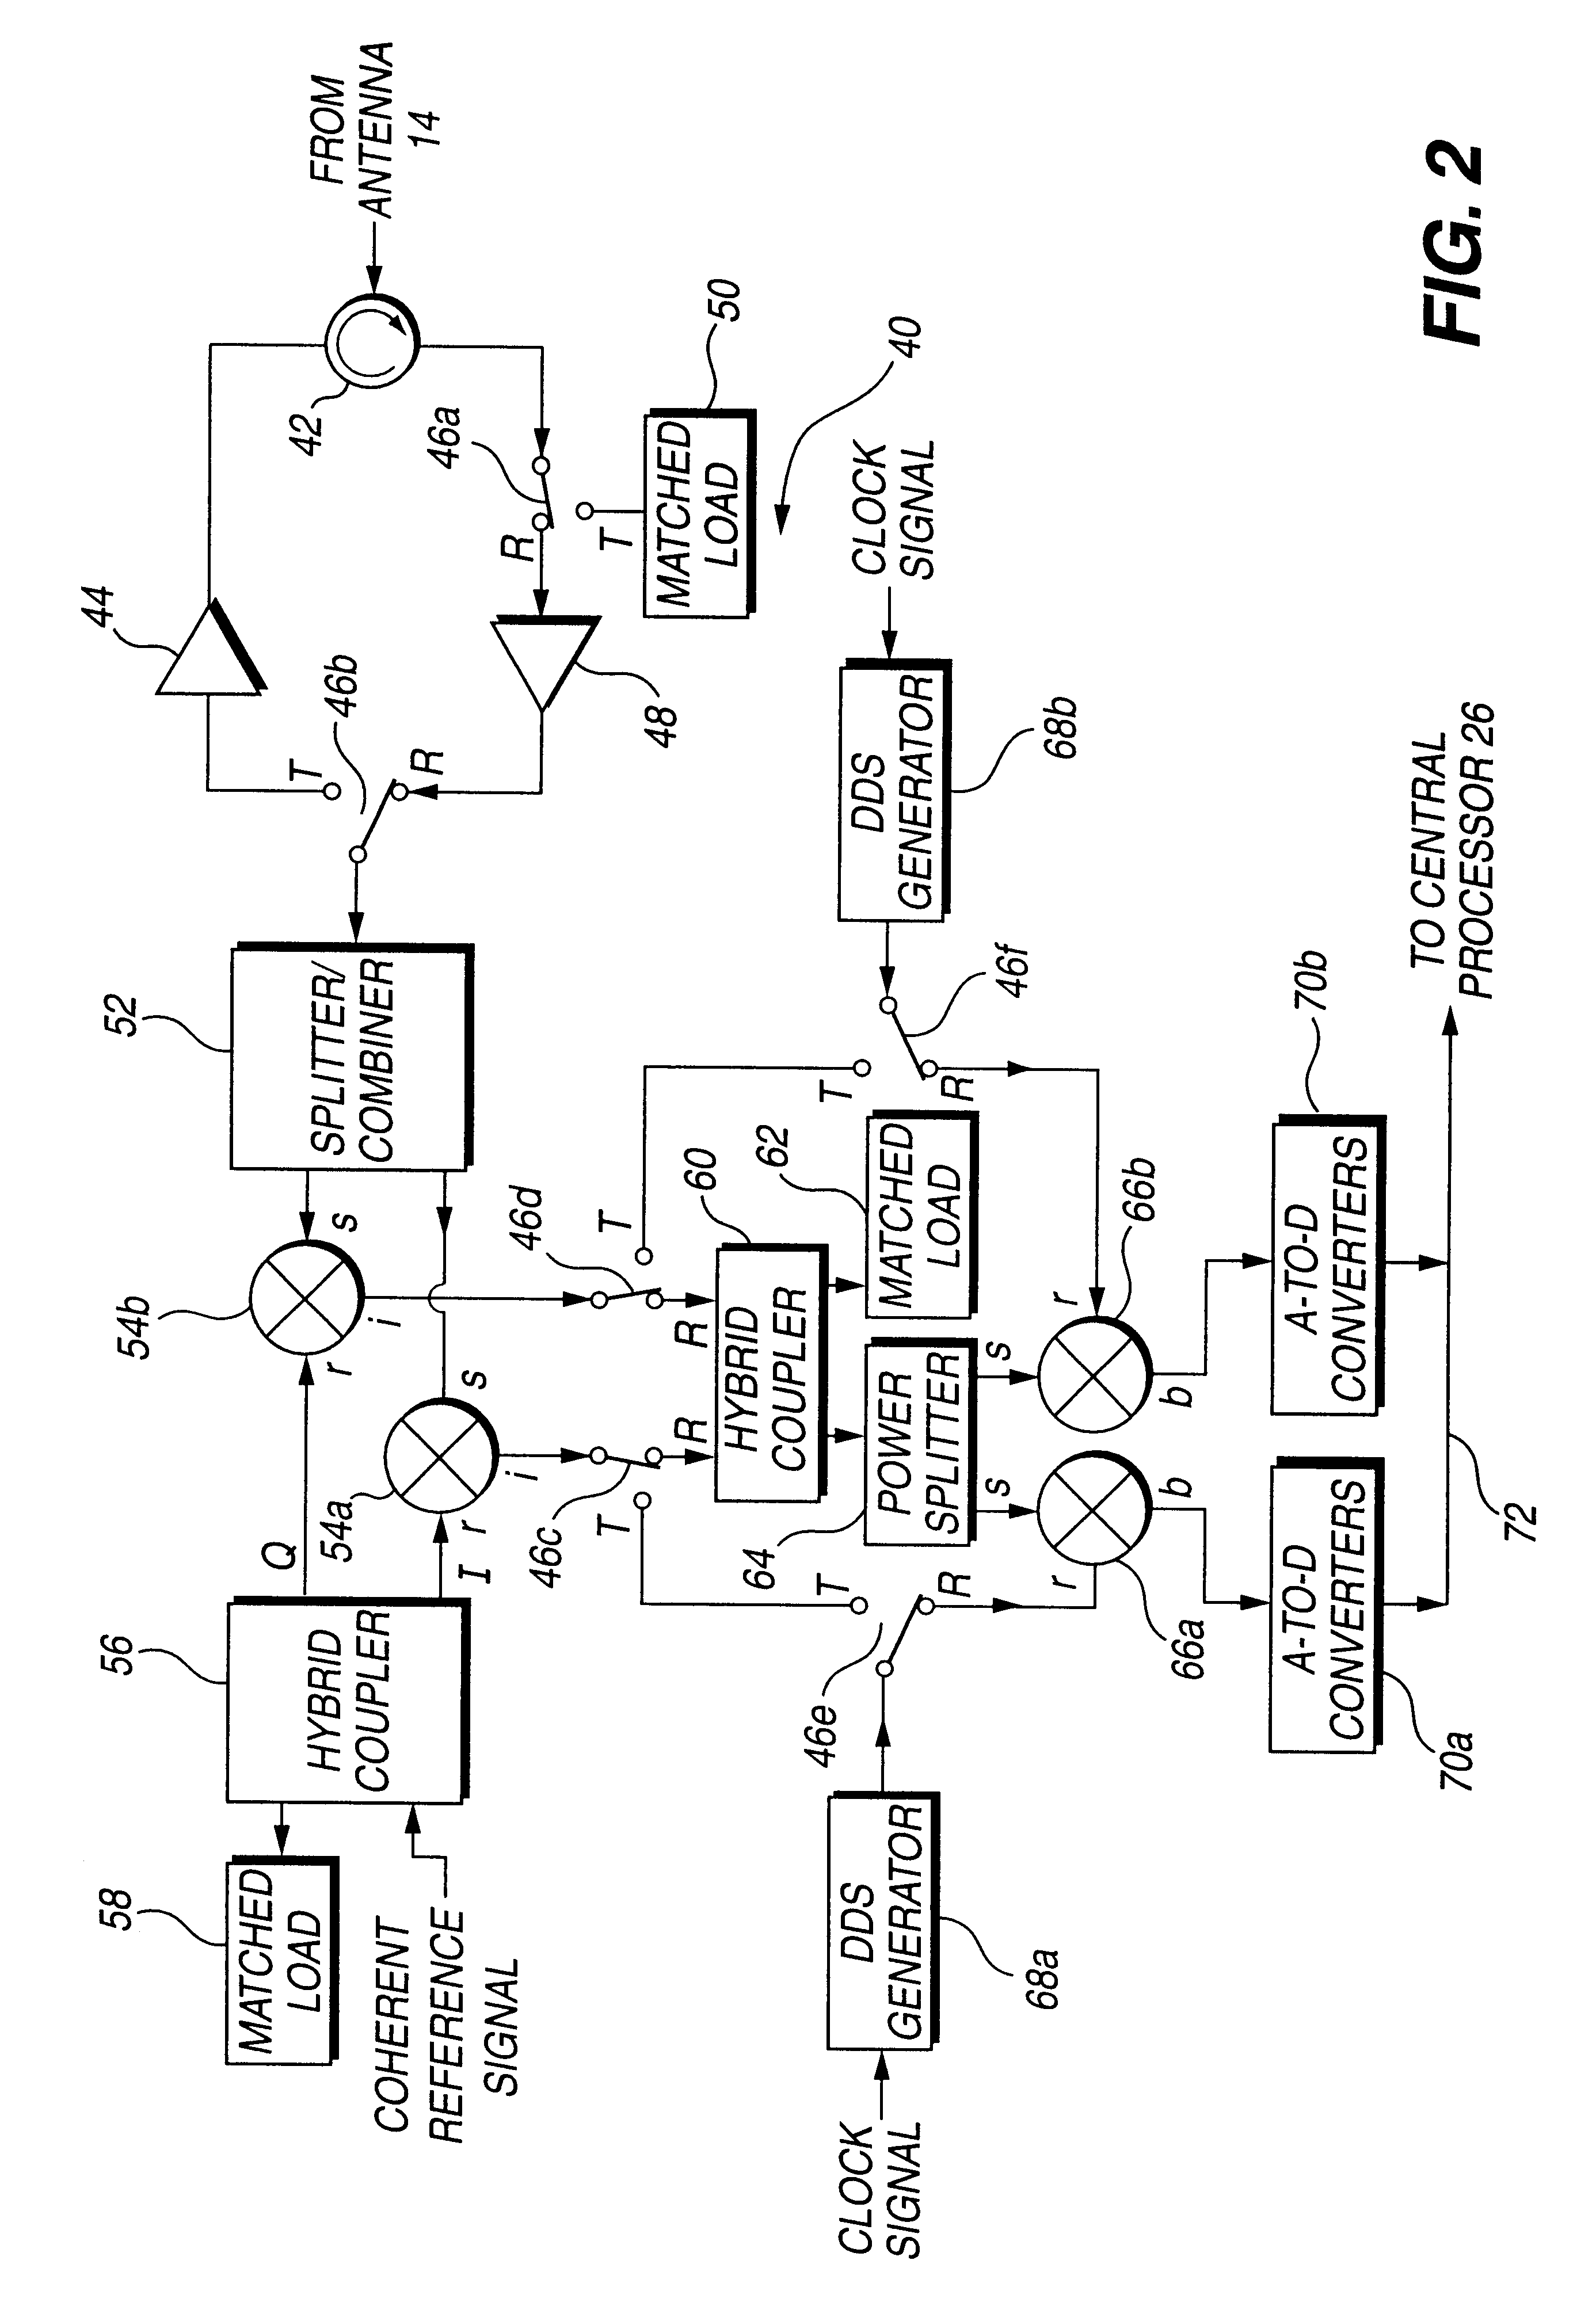 Circuit module for a phased array